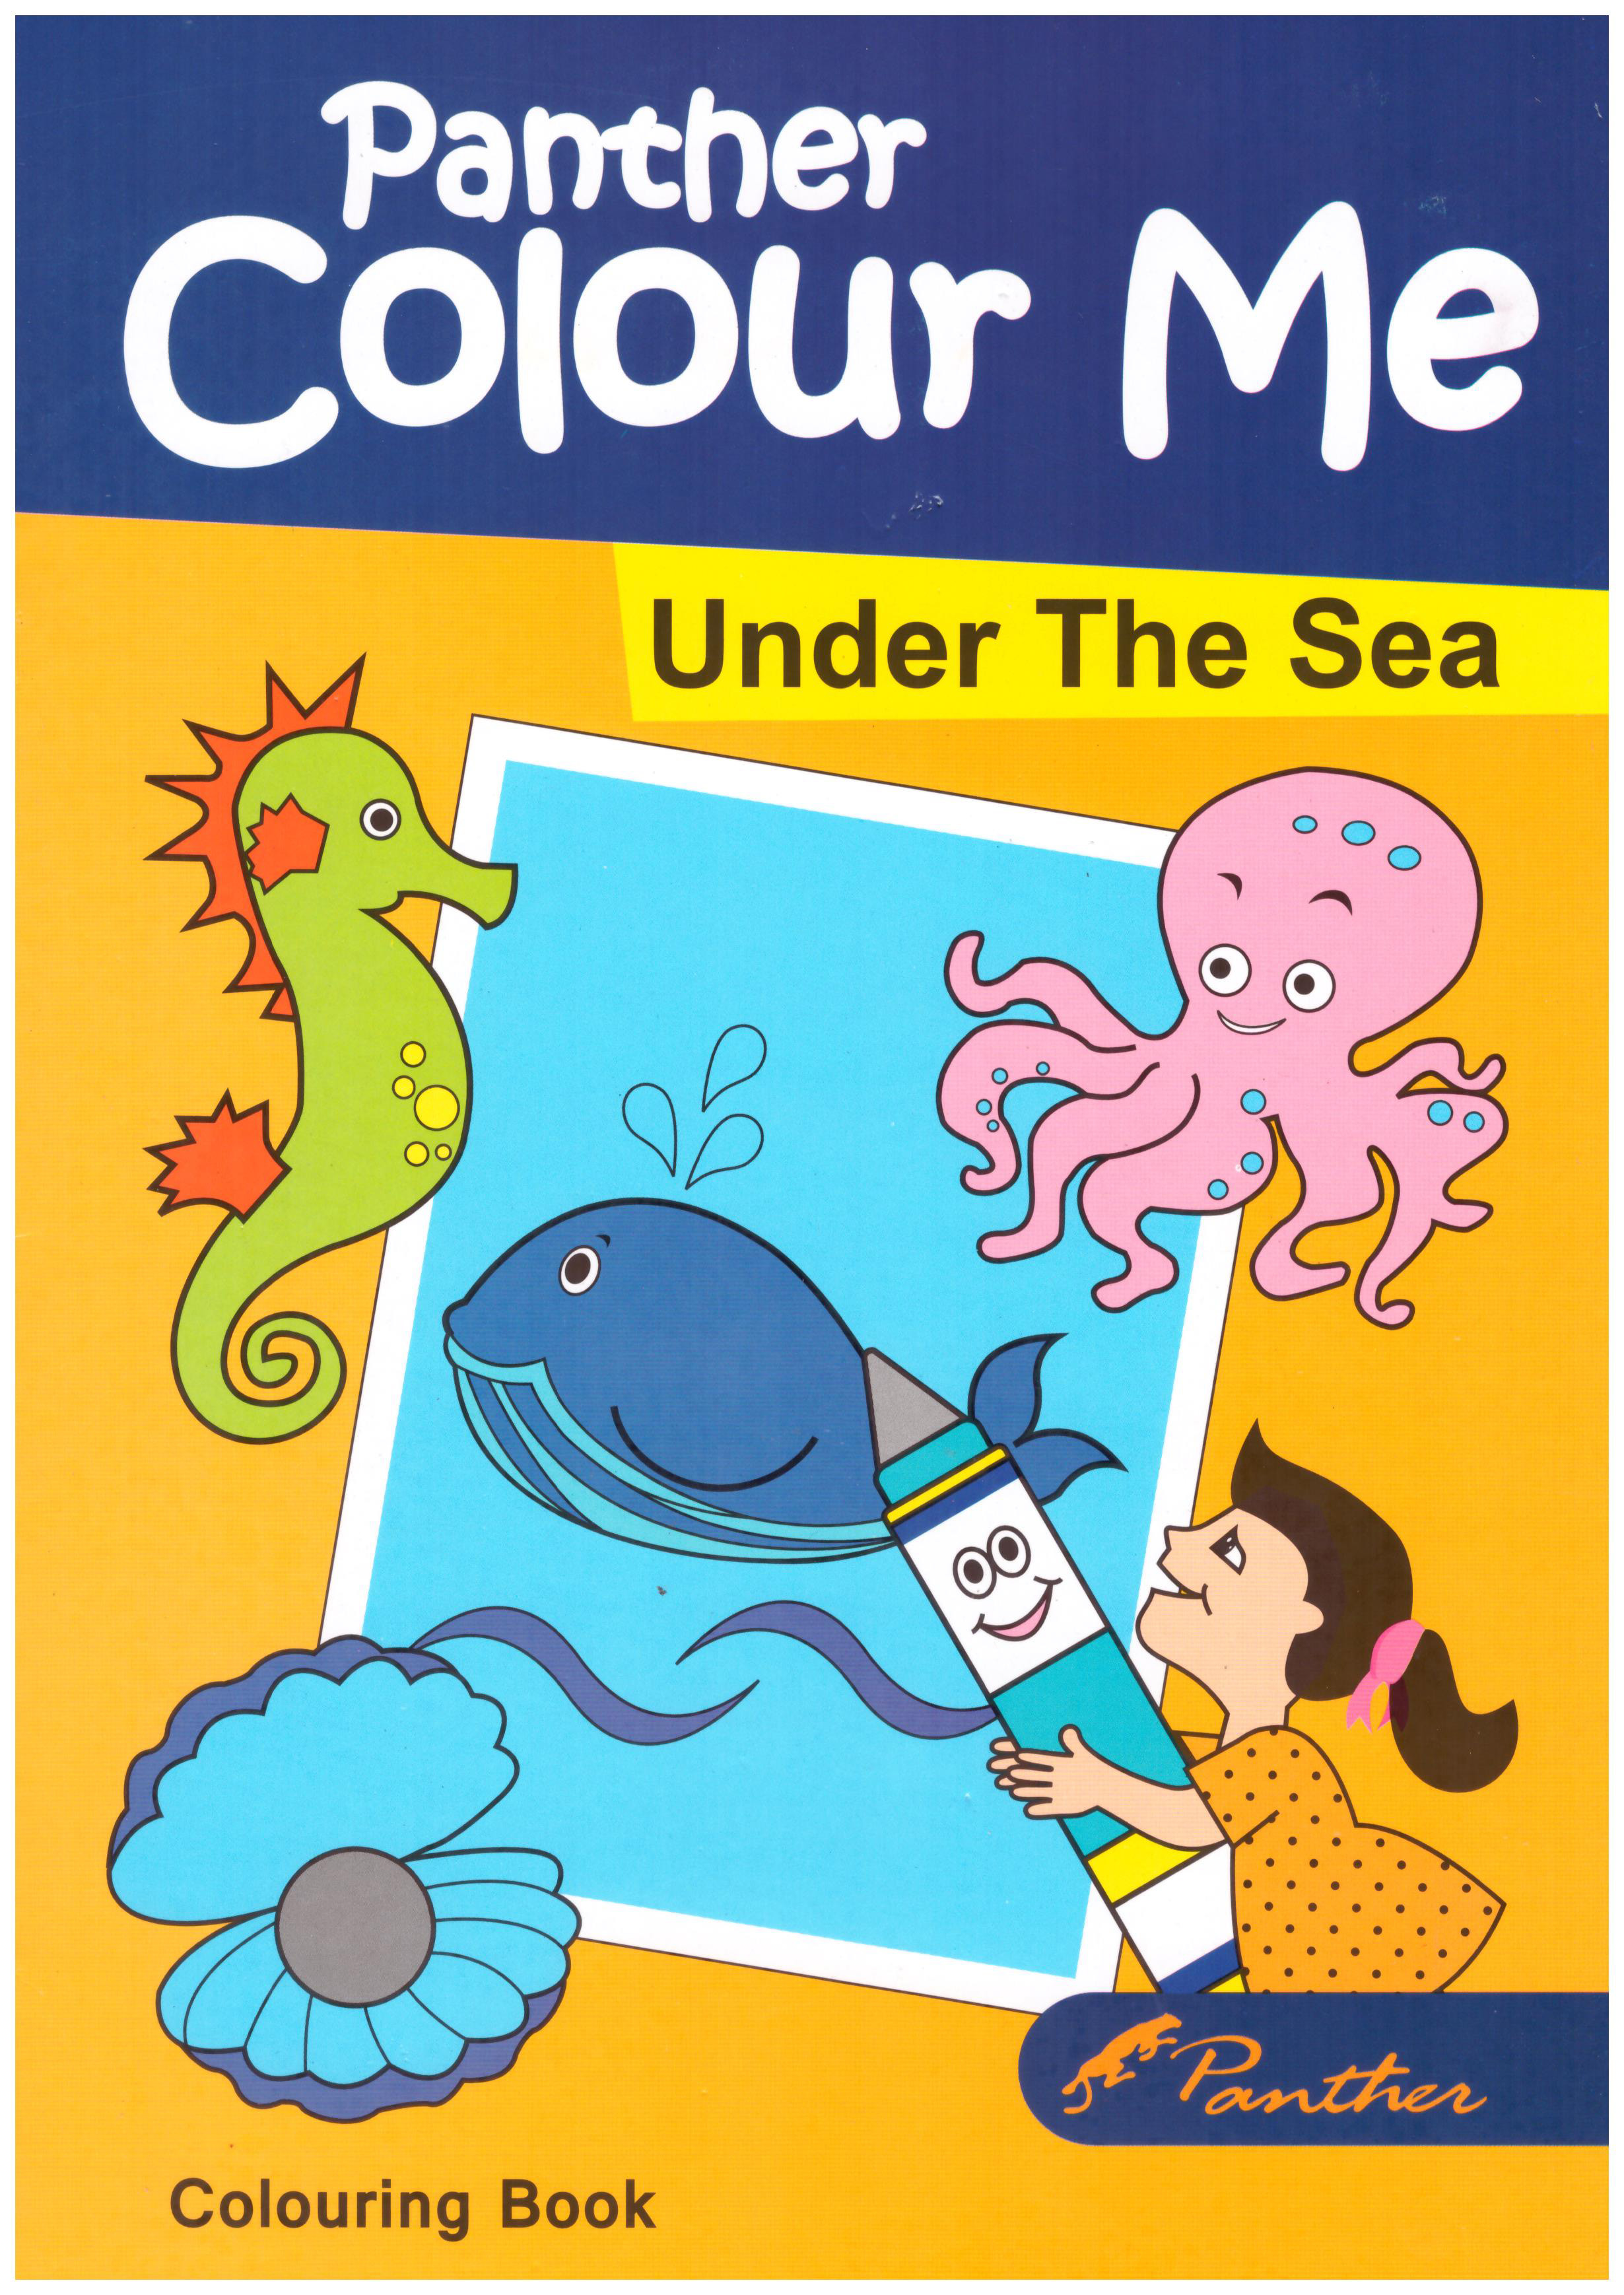 Panther Colour Me Under The Sea